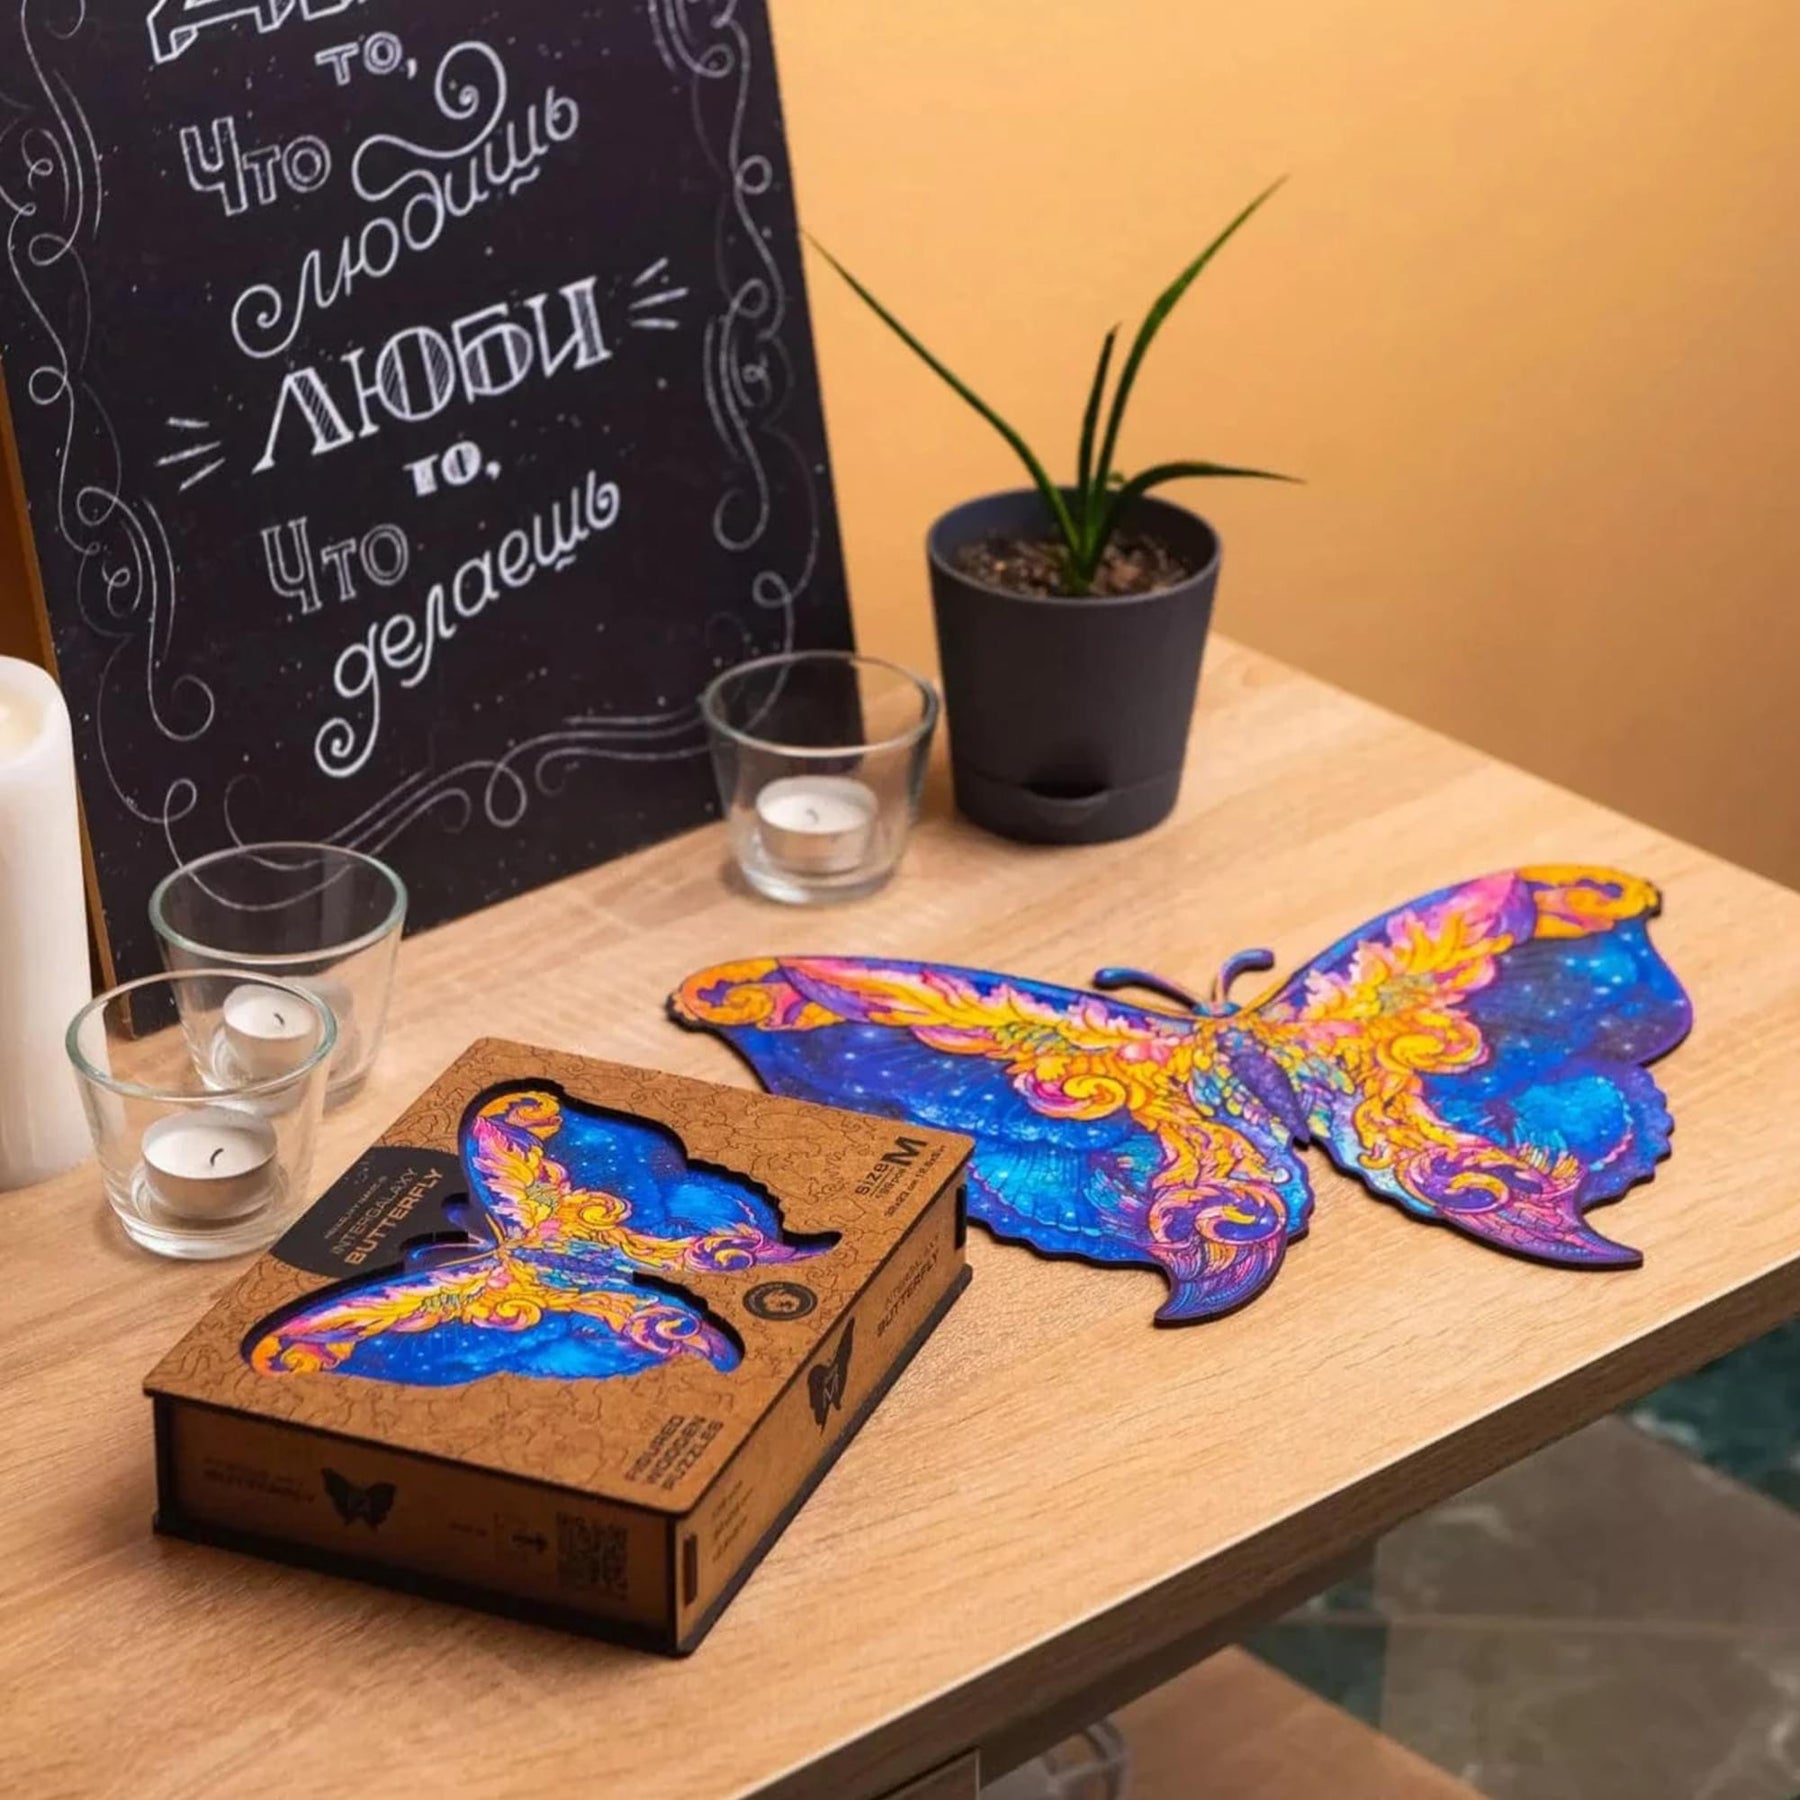 Intergalaxy Butterfly 306 Piece Shaped Wooden Jigsaw Puzzle